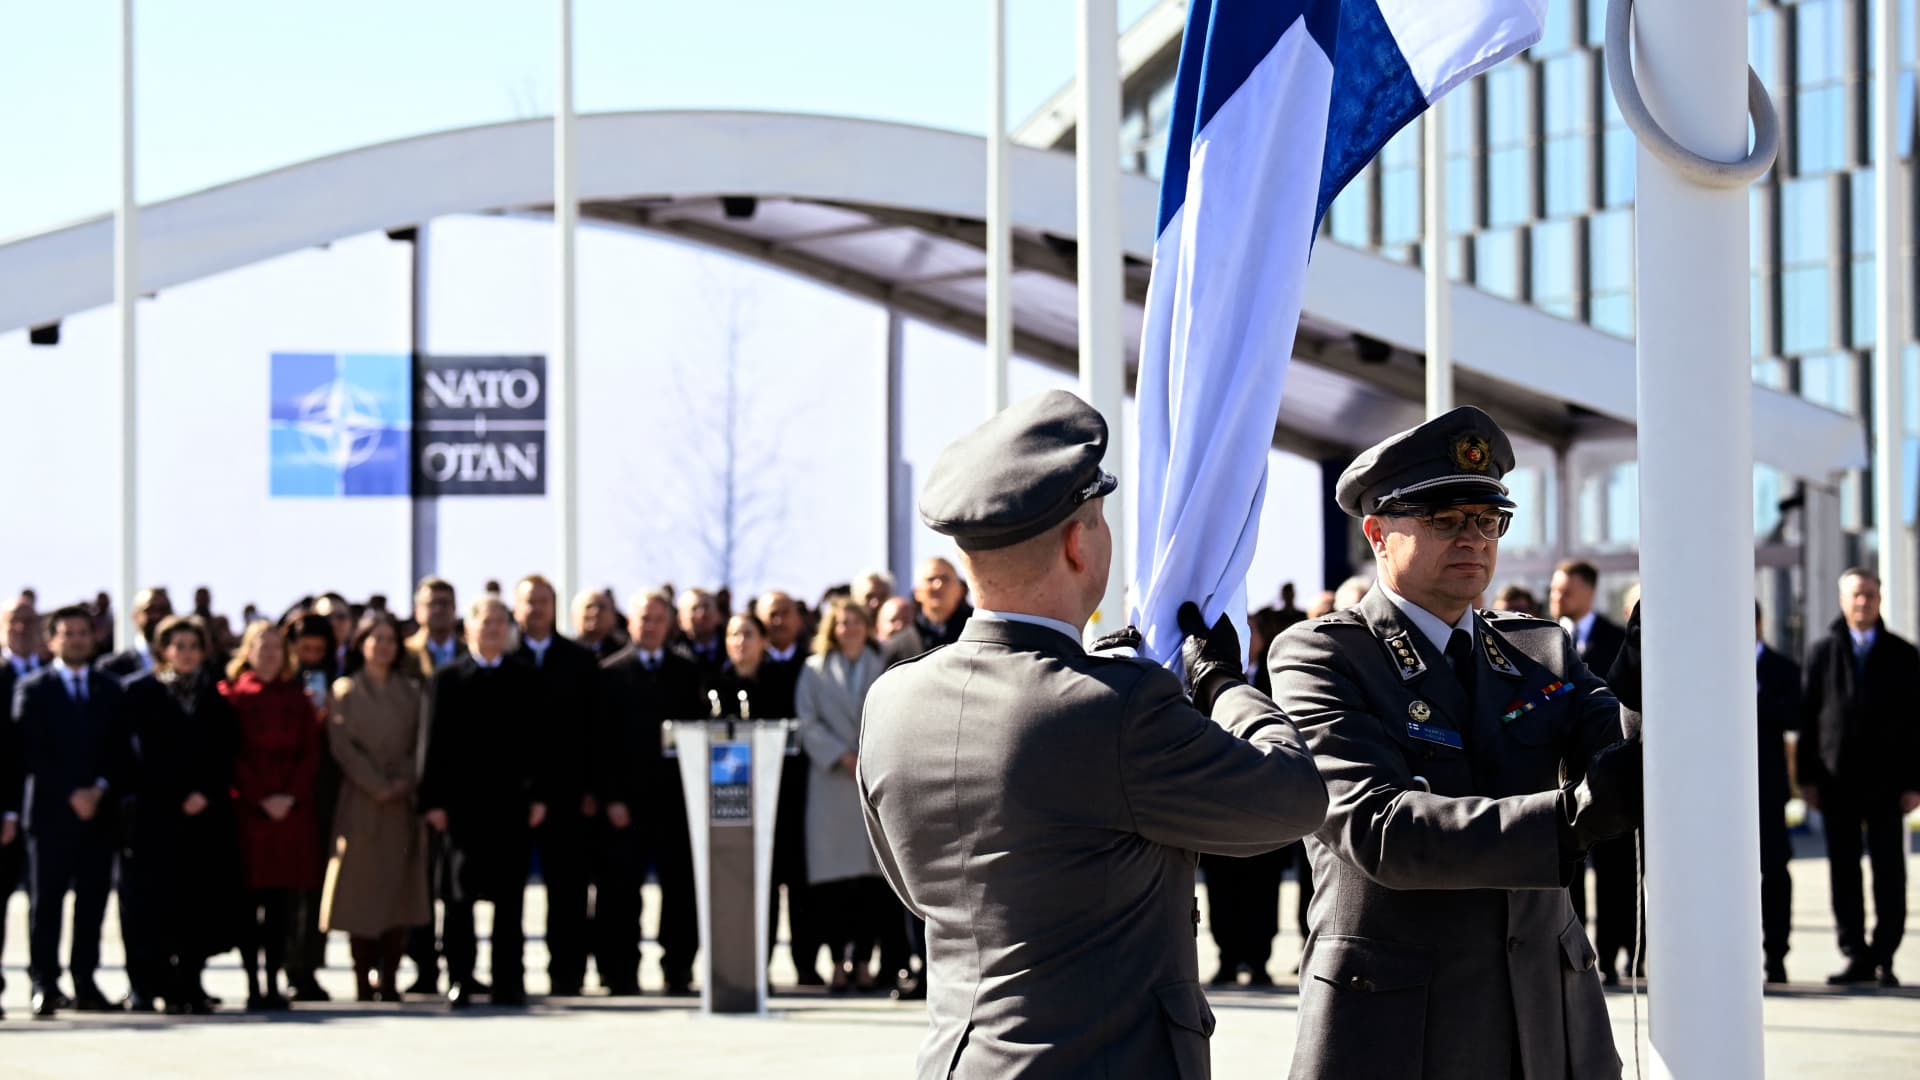 Finnish military personnel install Finland's national flag at the NATO headquarters in Brussels, on April 4, 2023.